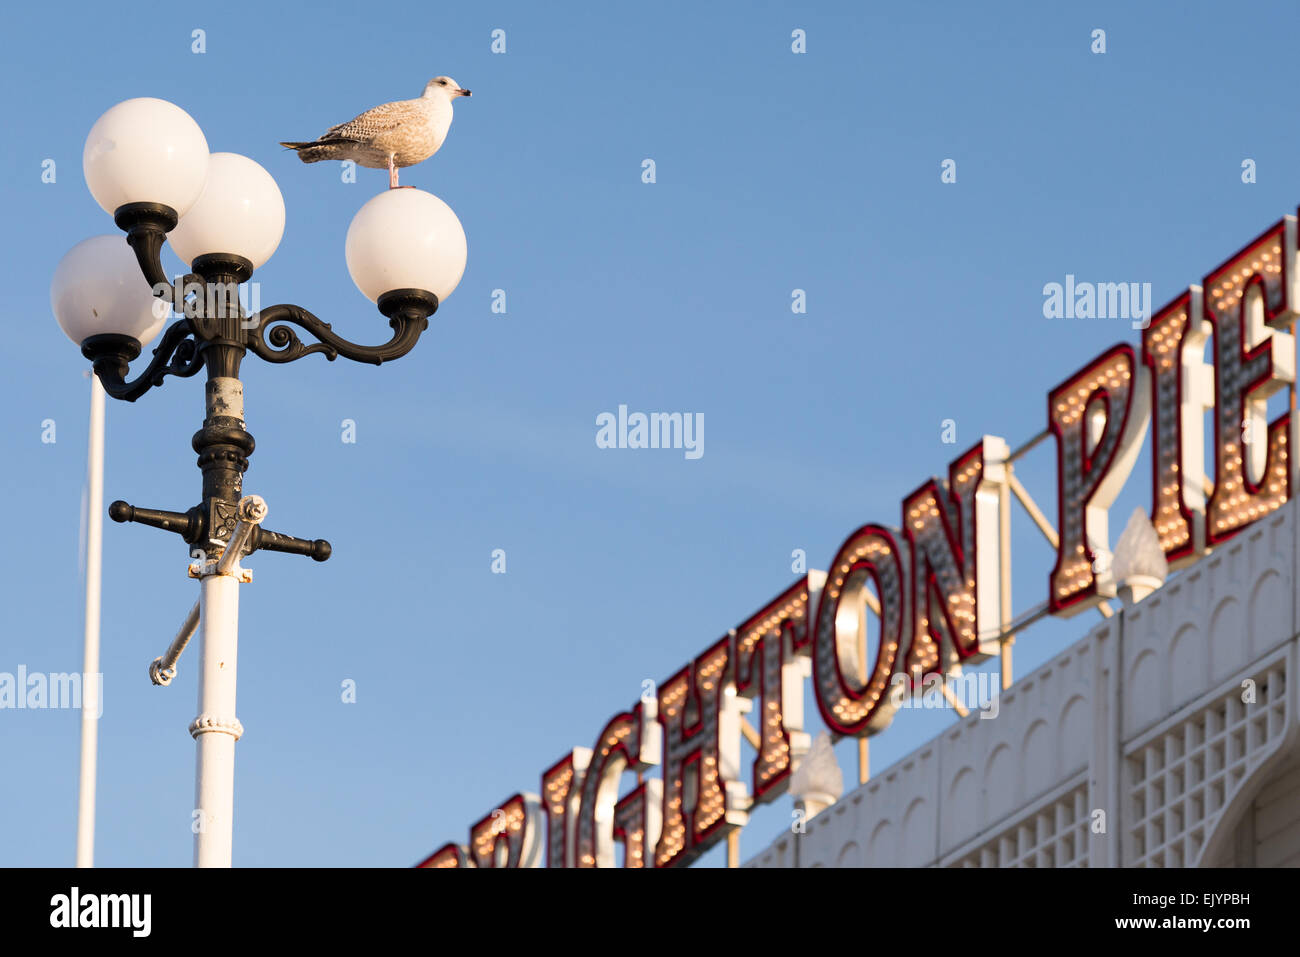 Sea bird eying food on one of Brighton Pier's lamp stands, de-focused Brighton Pier sign in the background Stock Photo